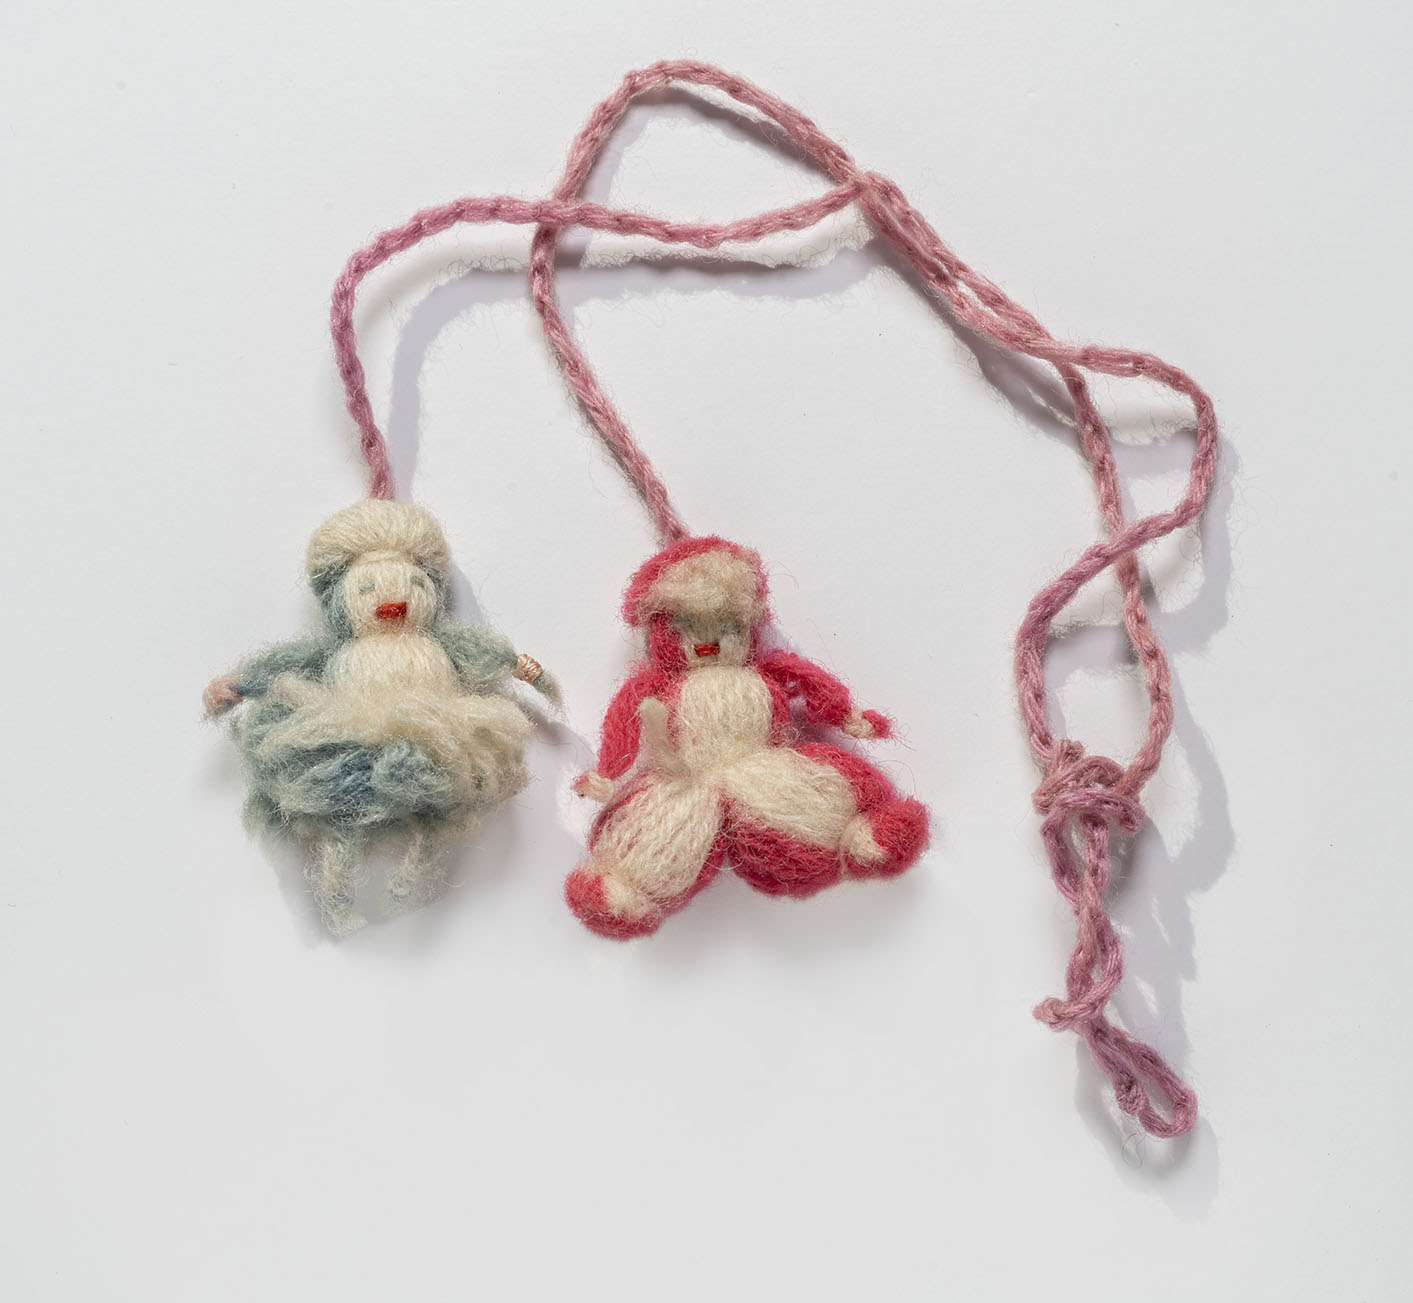 Two doll charms made out of yarn attached to each other with yarn strings. One doll charm is red and cream-colored yarn and wears pants. The other doll charm is blue and cream-colored yard and wears a skirt.